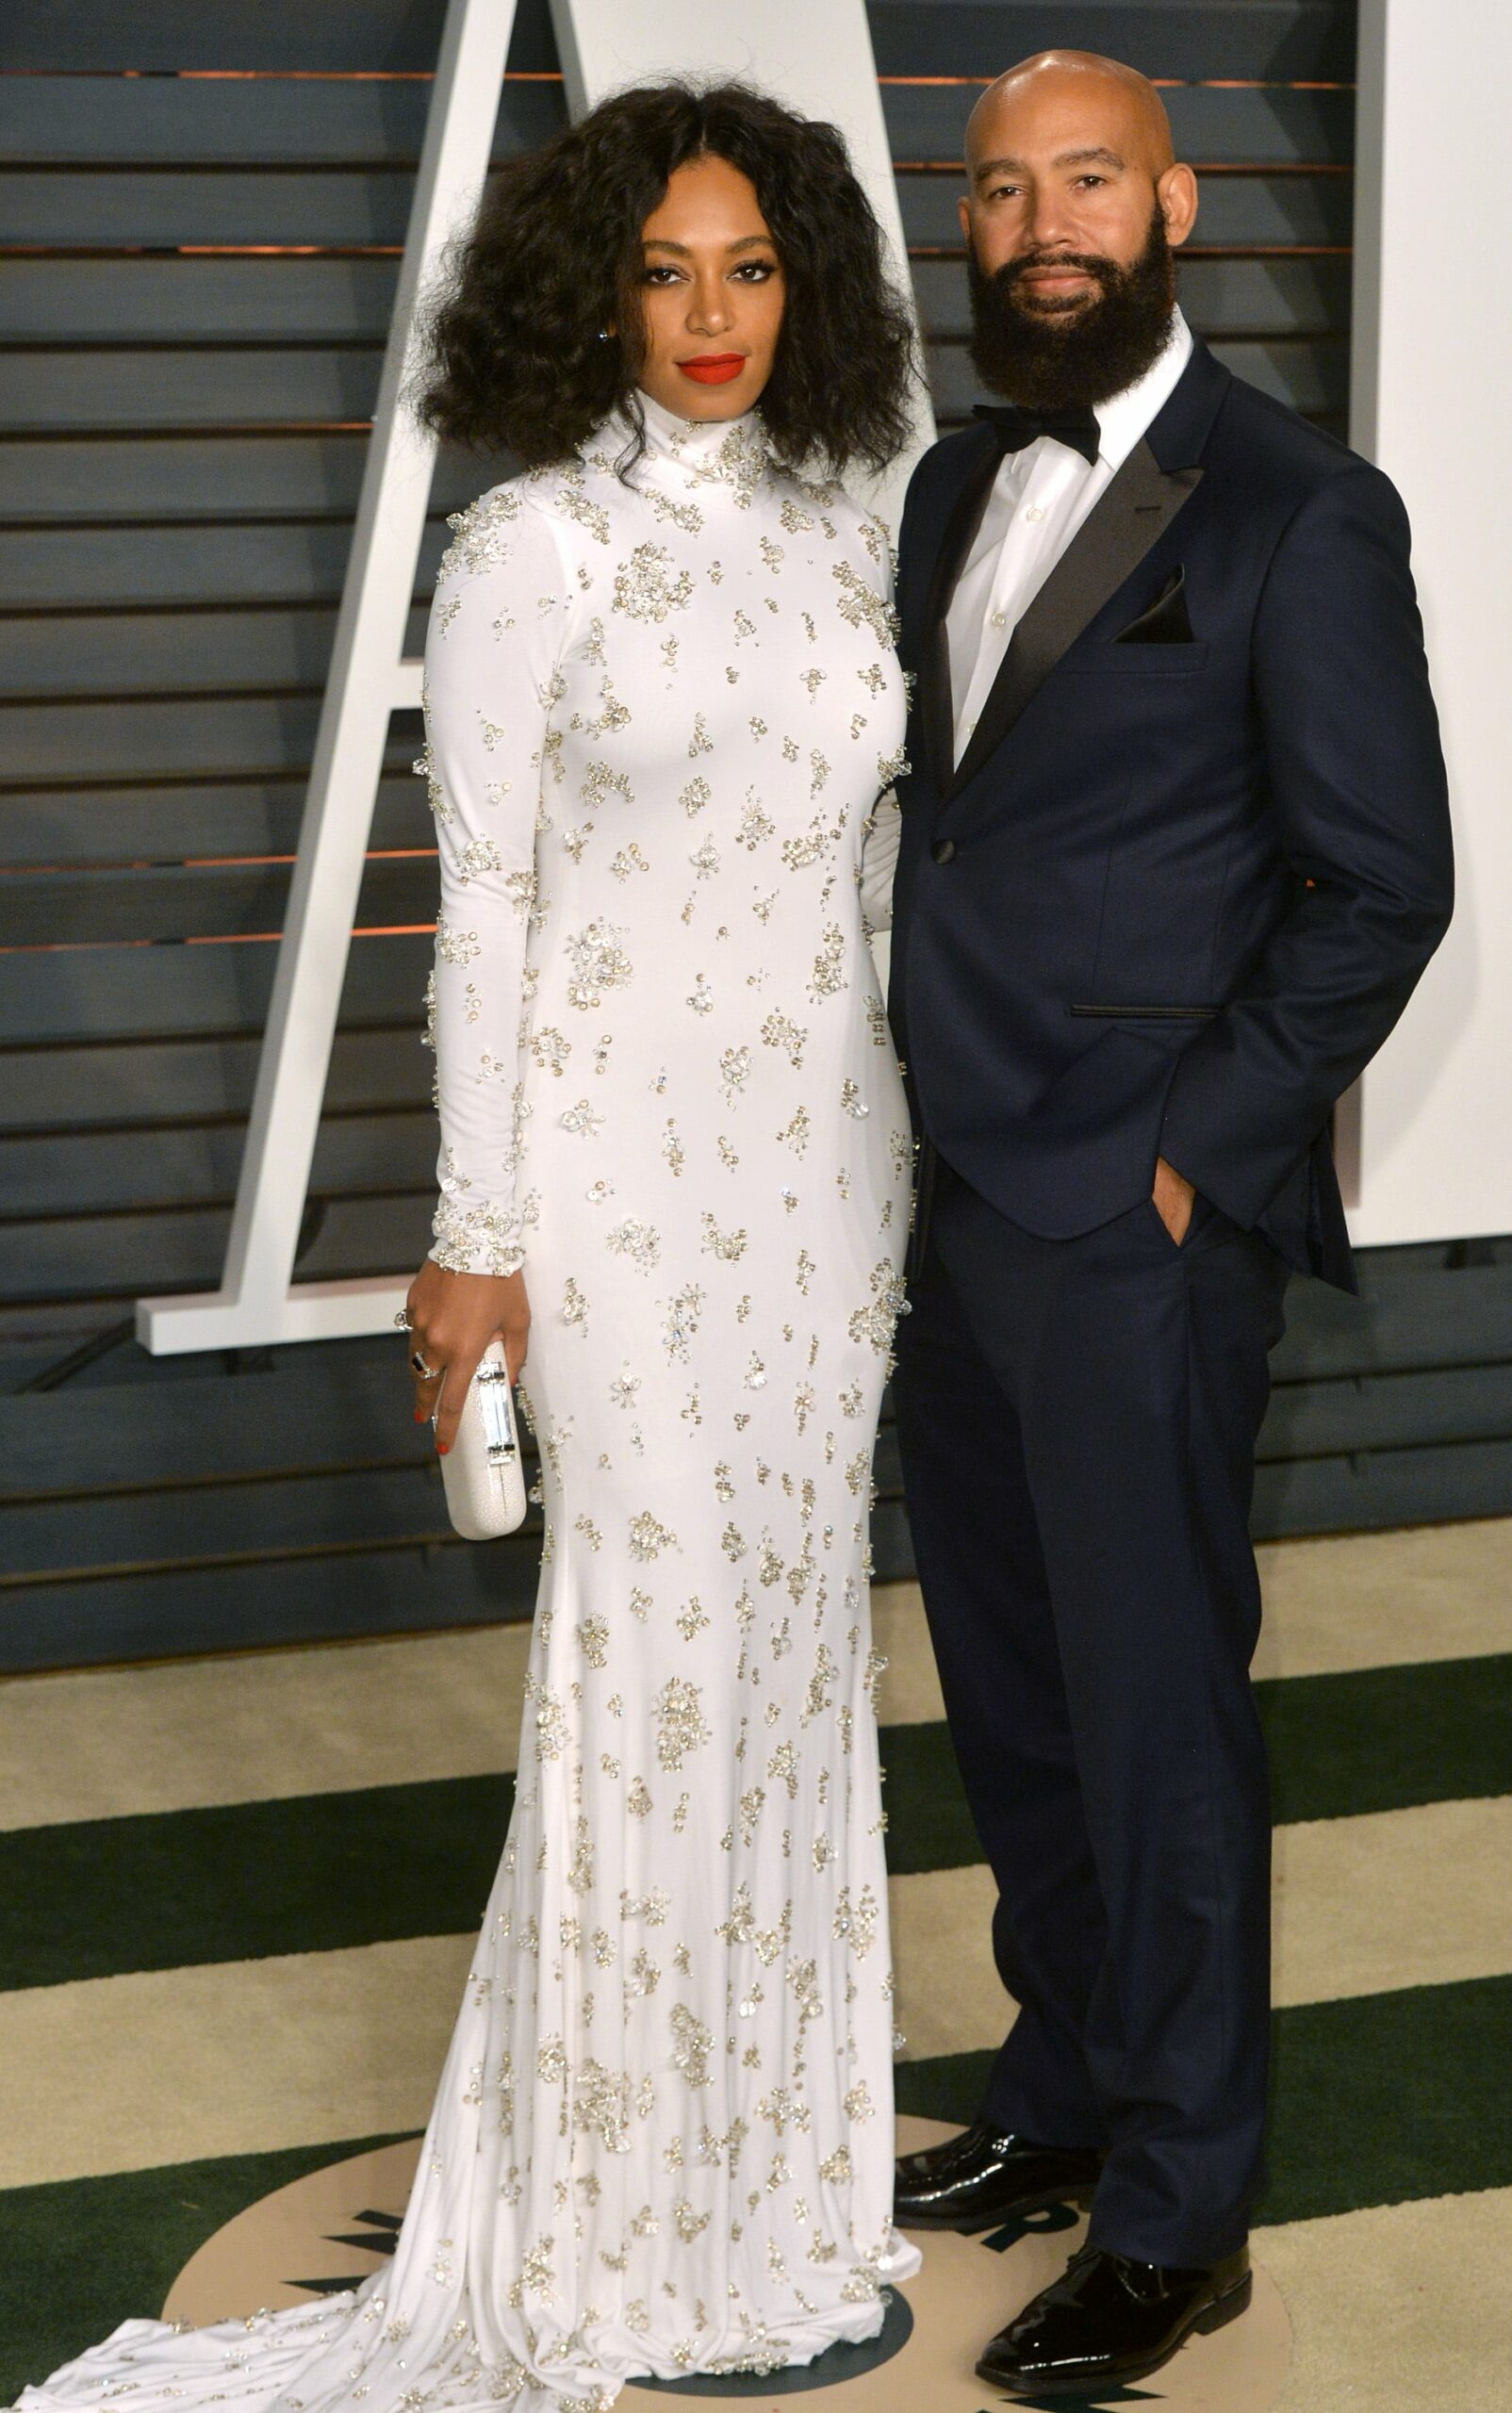 BEVERLY HILLS, CA - FEBRUARY 22:  Solange Knowles and Alan Ferguson arrive at the 2015 Vanity Fair Oscar Party Hosted By Graydon Carter at Wallis Annenberg Center for the Performing Arts on February 22, 2015 in Beverly Hills, California.  (Photo by Anthony Harvey/Getty Images)